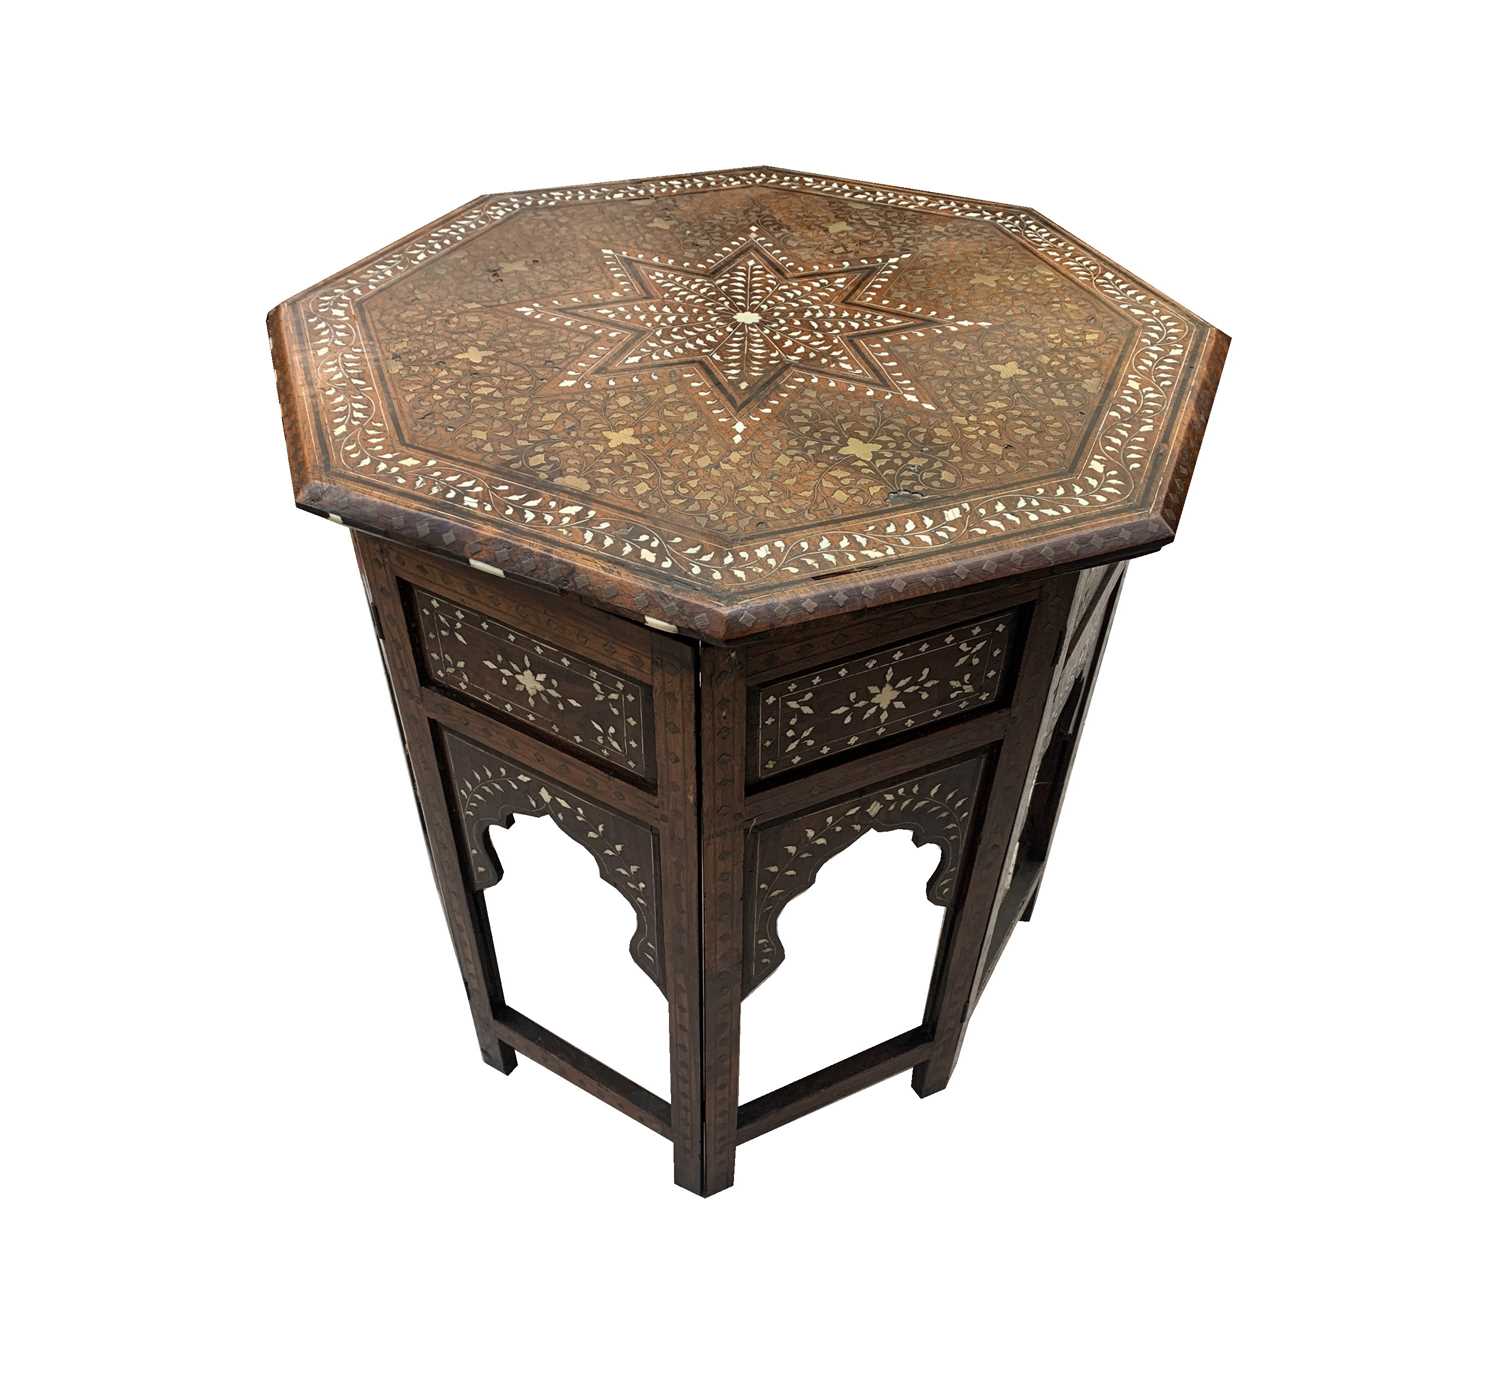 A Hoshiarpur folding octagonal occasional table, Northern India, circa 1880, inlaid with bone and - Image 4 of 4